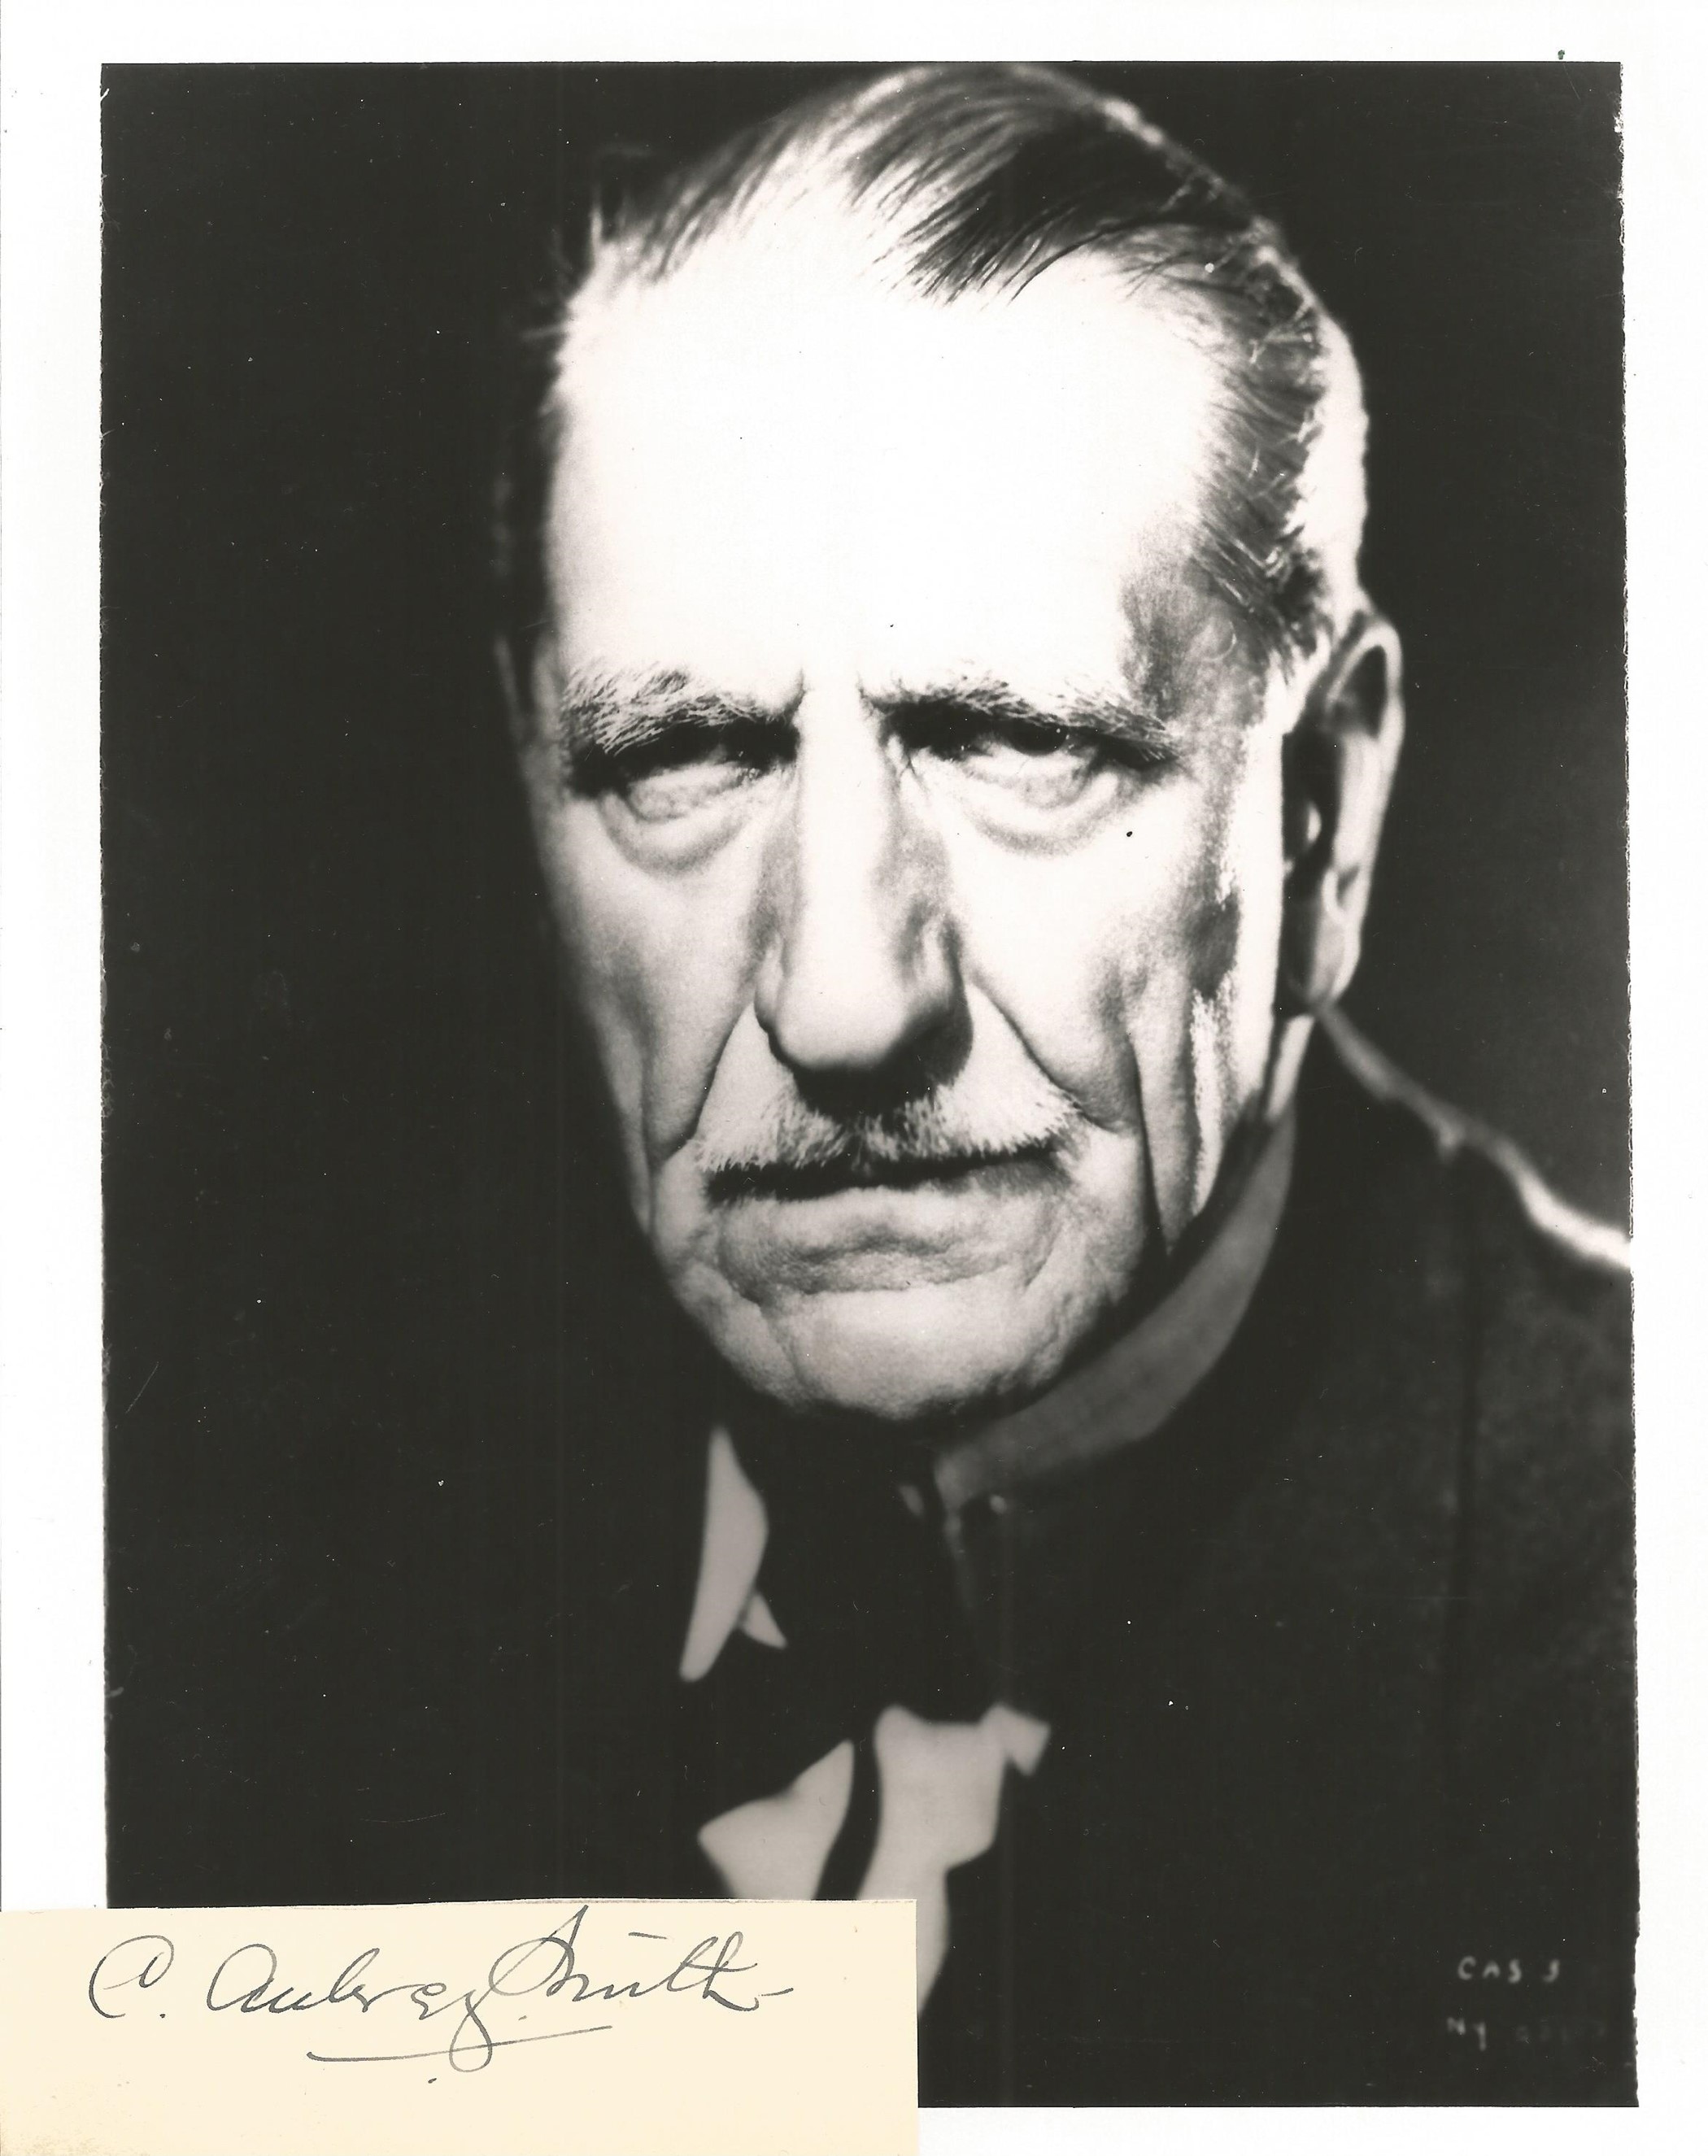 C Aubrey Smith small signature piece with 10 x 8 inch black and white photo. Smith was an English